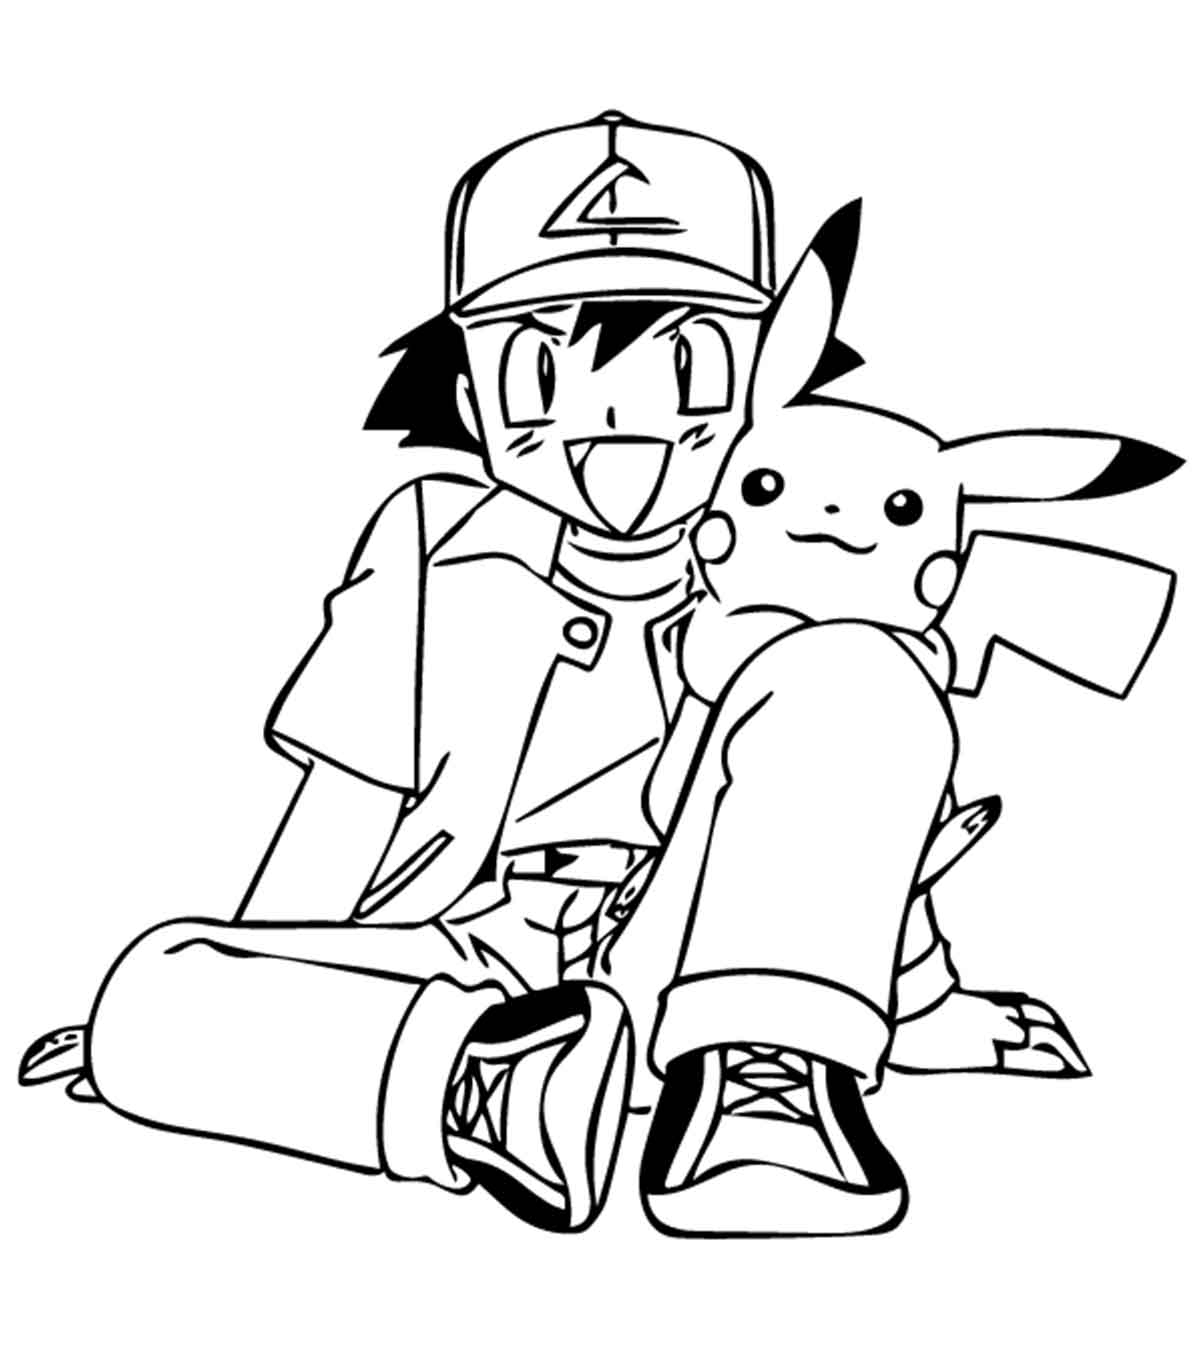 Pokemon Coloring Page Top 93 Free Printable Pokemon Coloring Pages Online